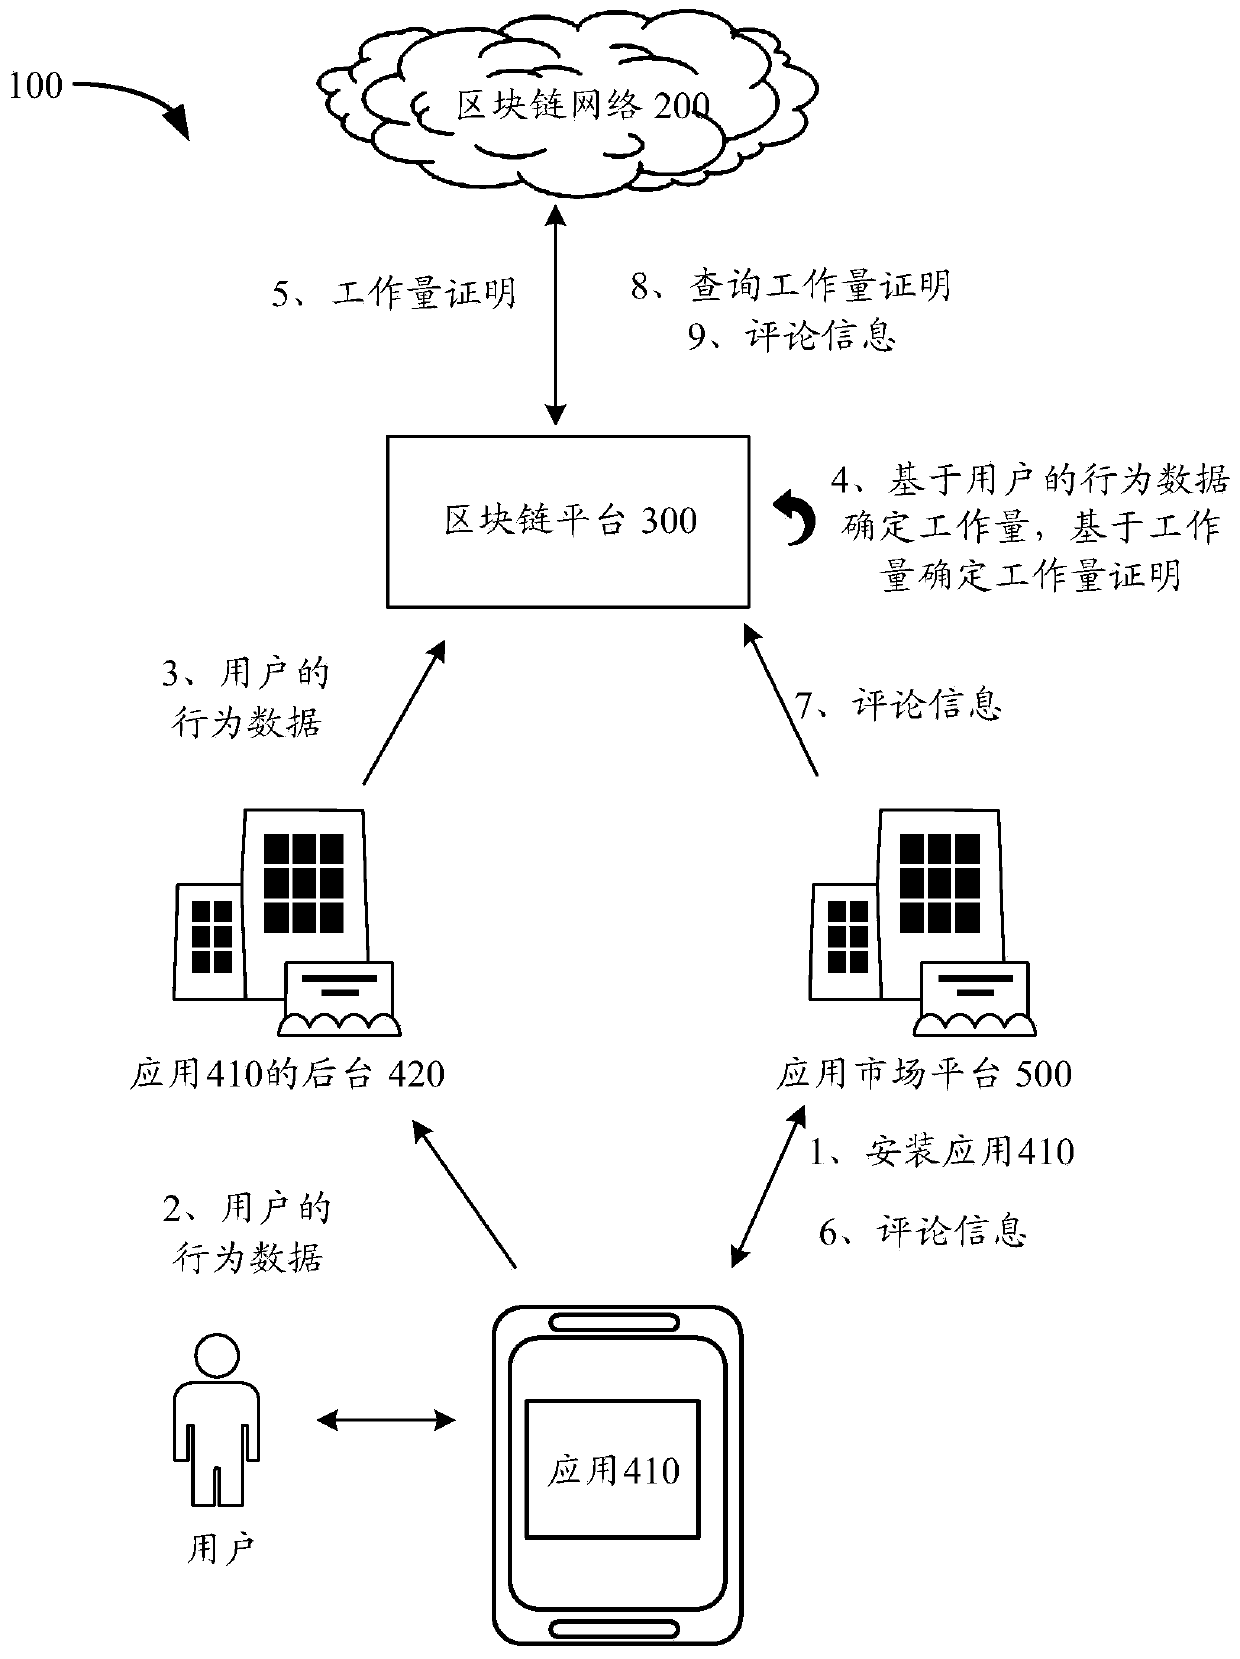 Application comment information processing method and device based on block chain network